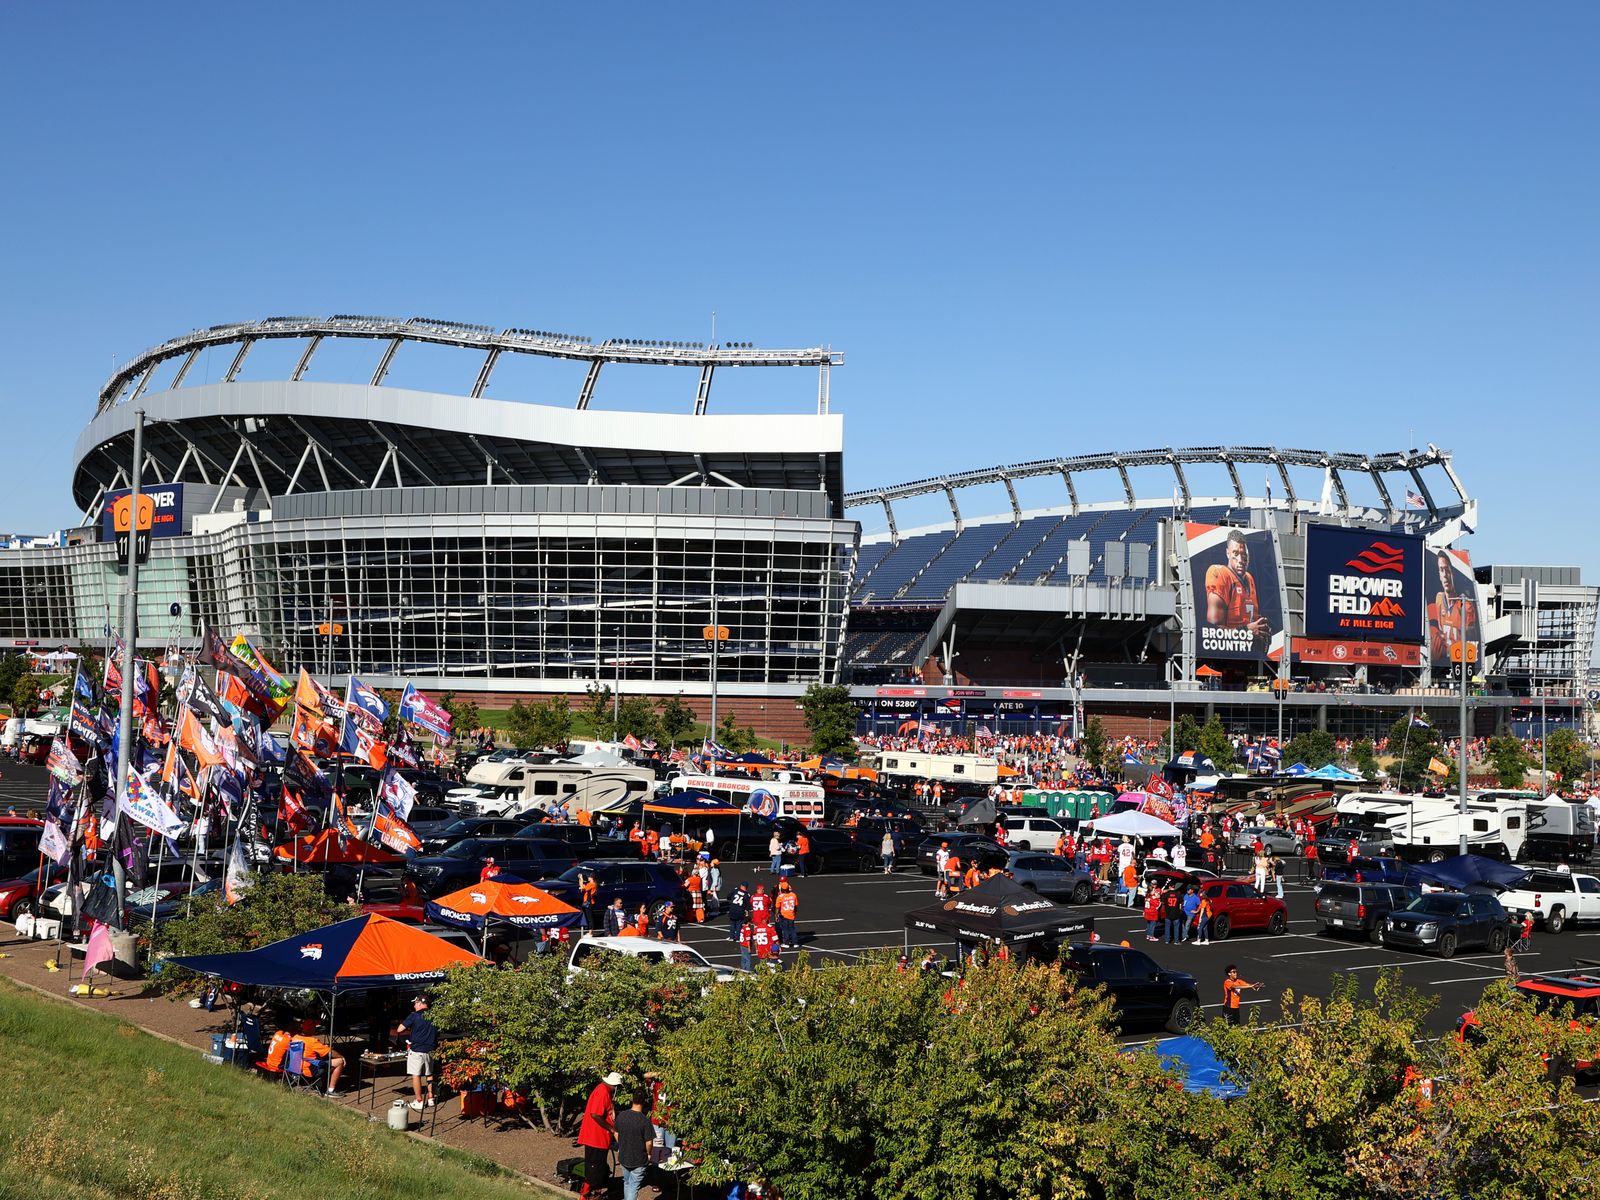 Denver Broncos owners ask season-ticket holders for input on moving stadium  - Axios Denver